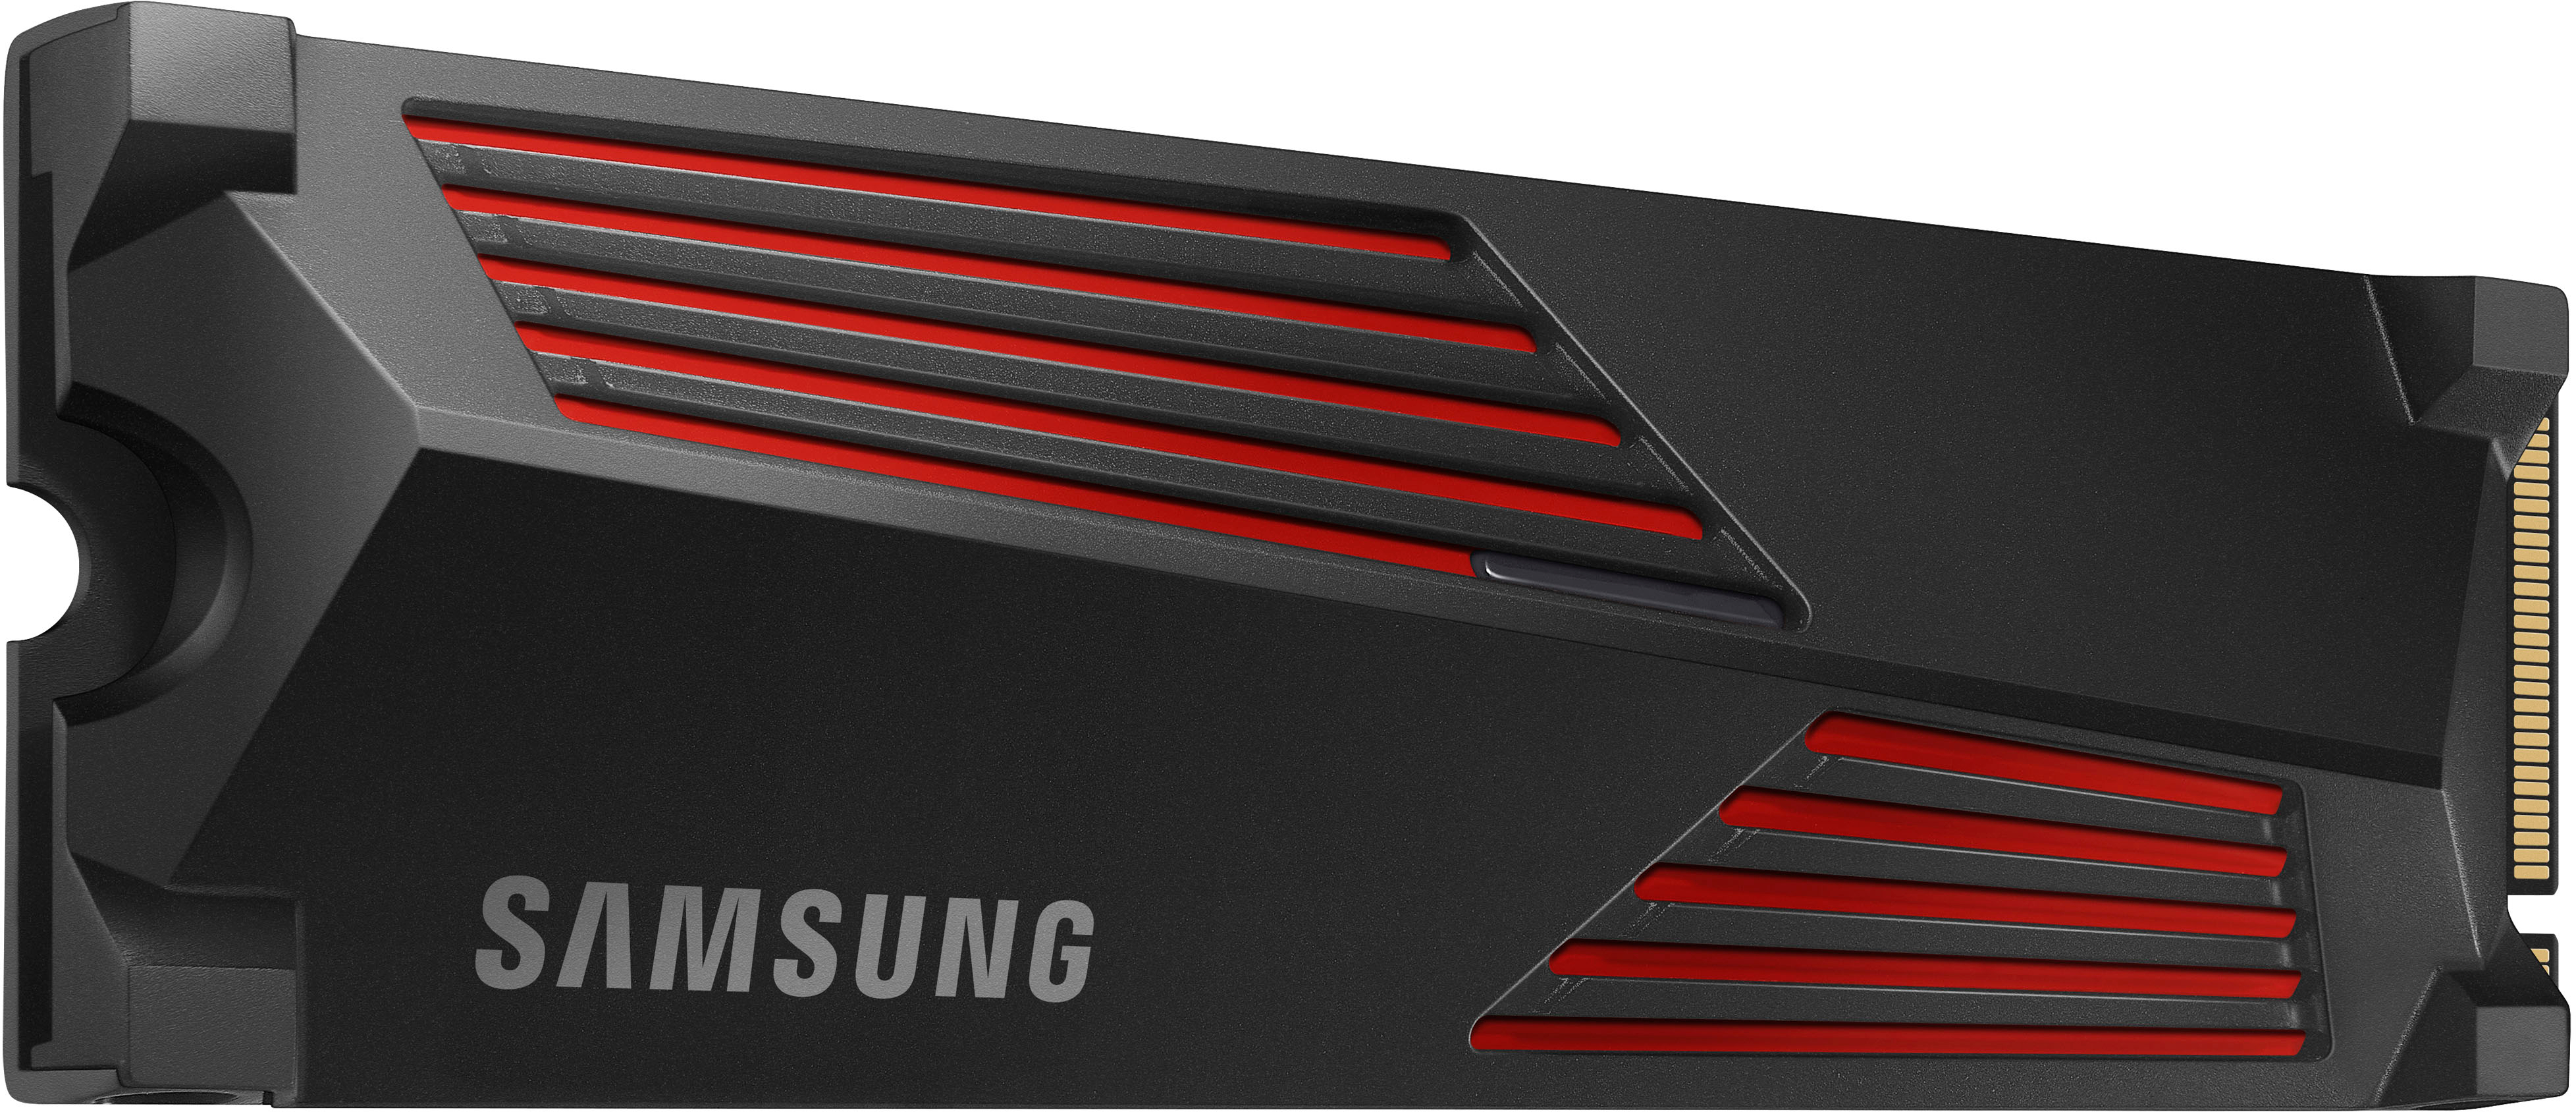  Buy SAMSUNG 990 PRO SSD 2TB PCIe 4.0 M.2 Internal Solid State  Hard Drive, Fastest Speed for Gaming, Heat Control, Direct Storage and  Memory Expansion for Video Editing, Heavy Graphics, MZ-V9P2T0B/AM